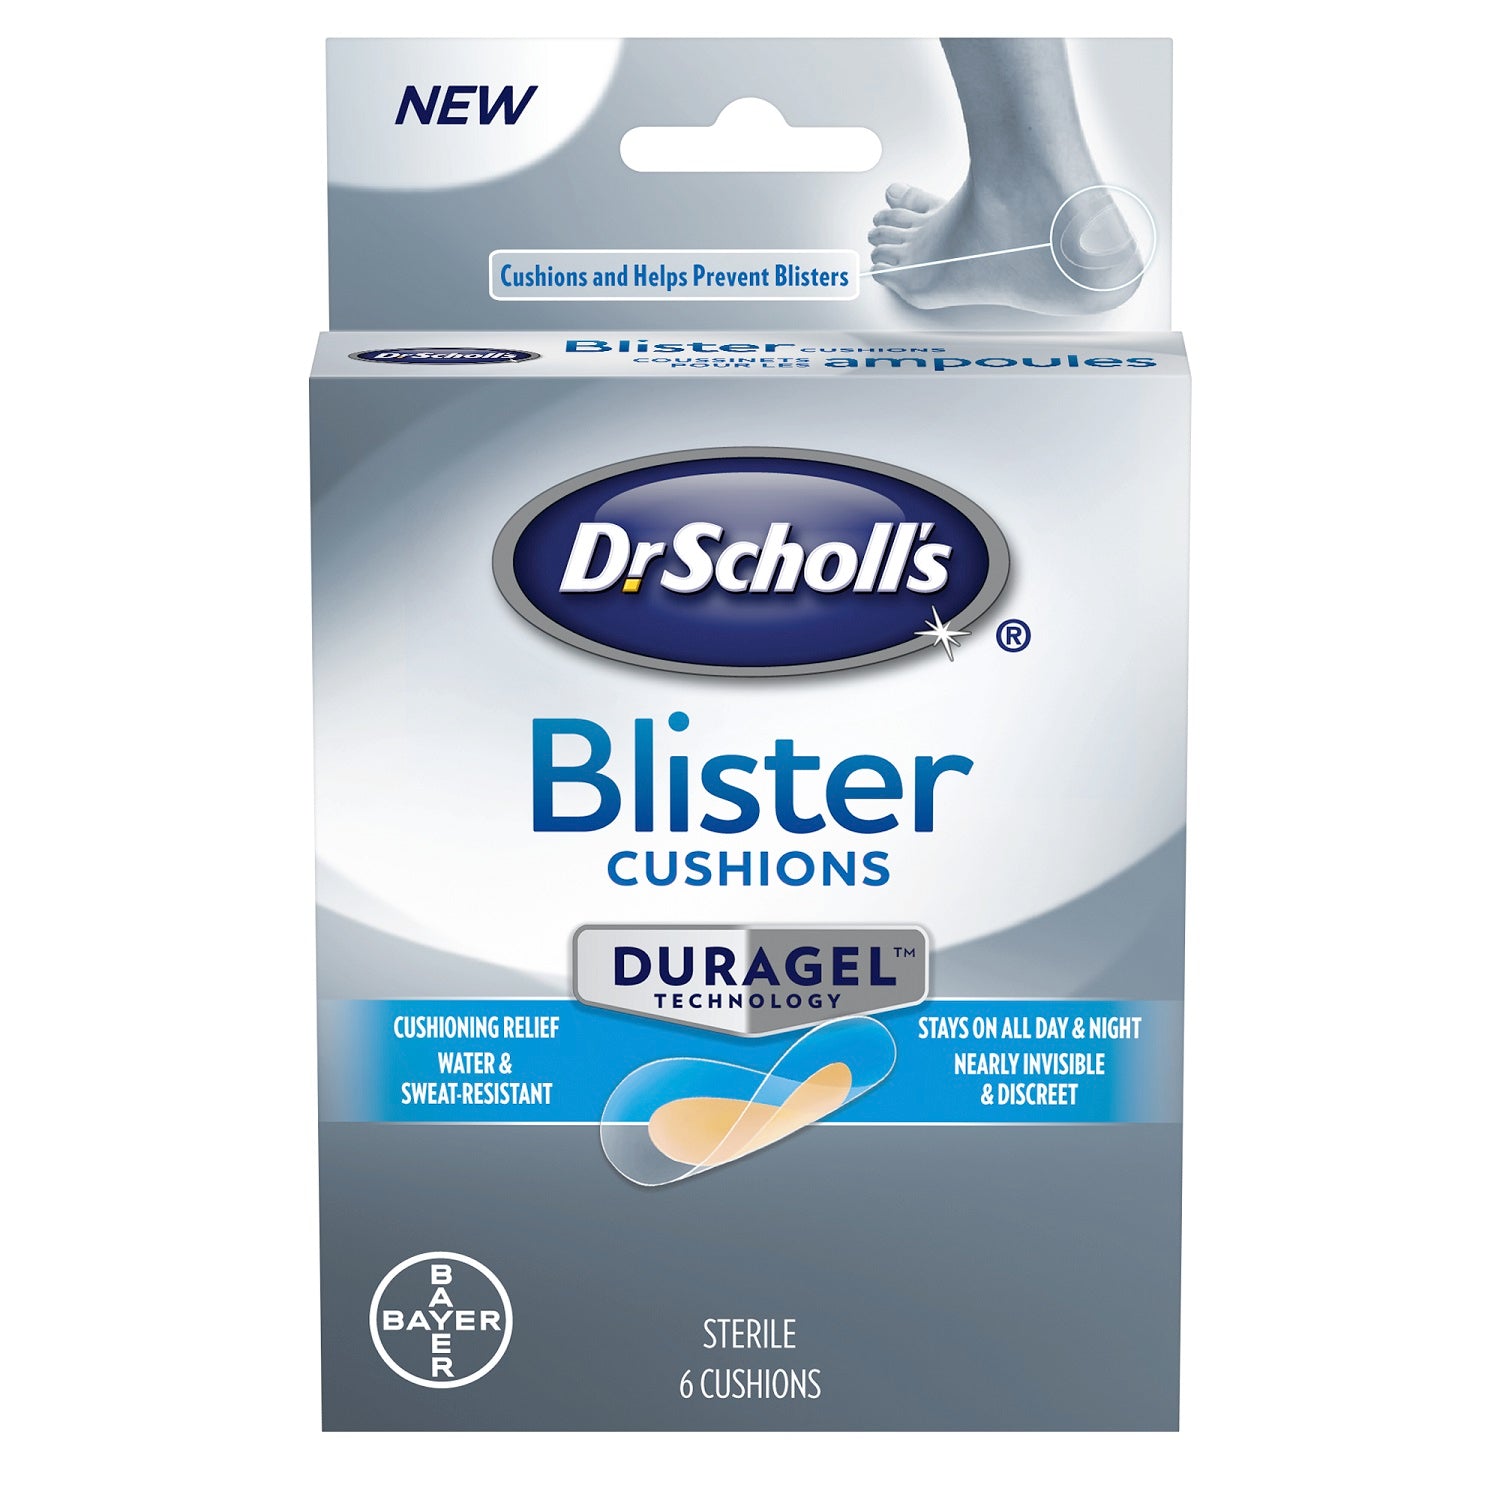 Dr. Scholl's Blister Cushions with 